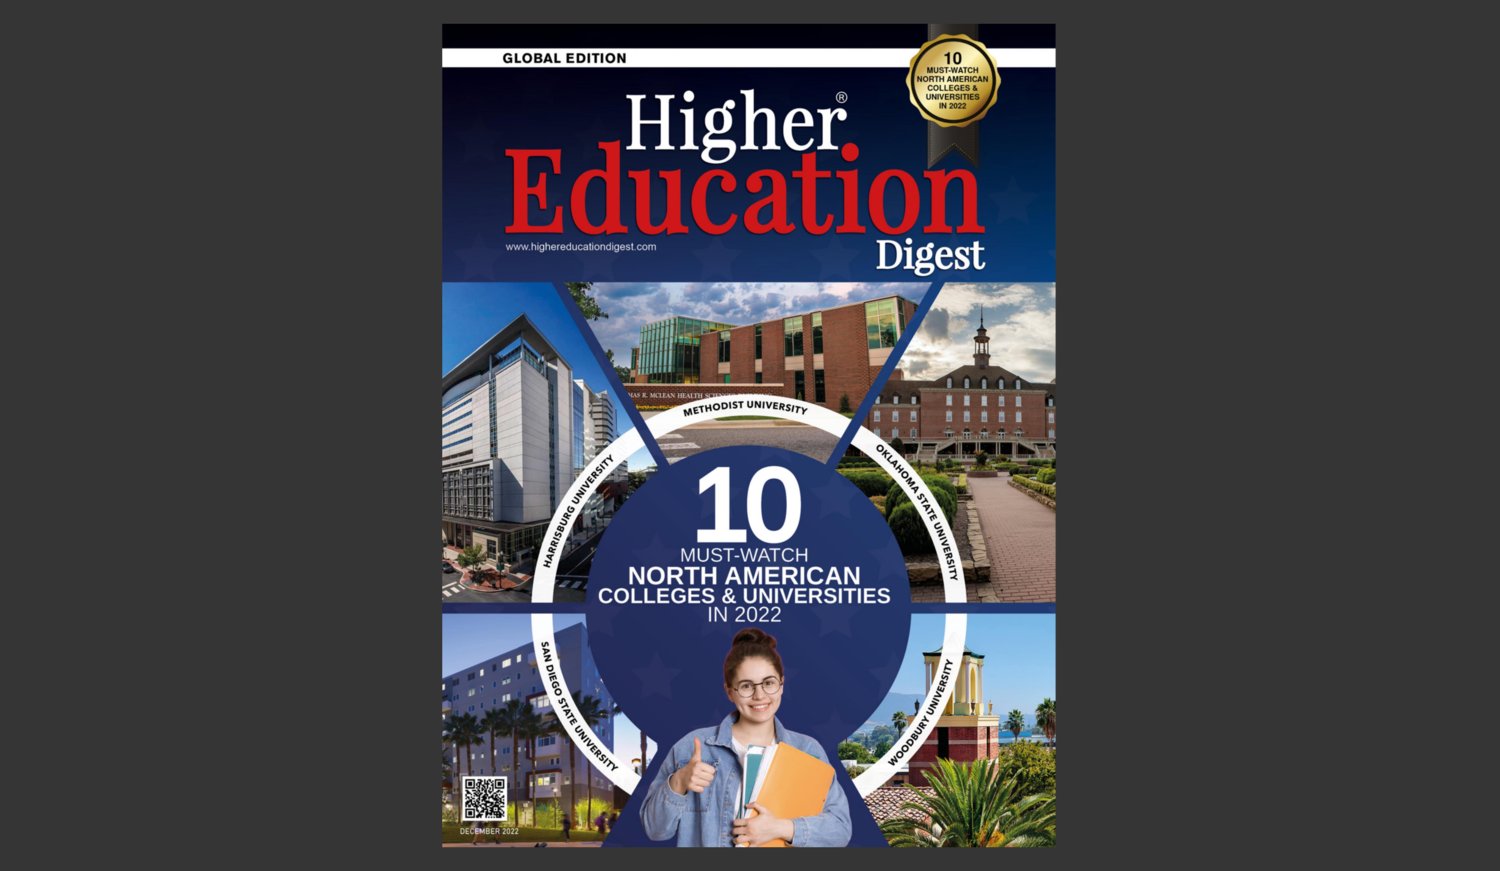 Methodist University has been named one of 10 "must watch" universities by Higher Education Digest.